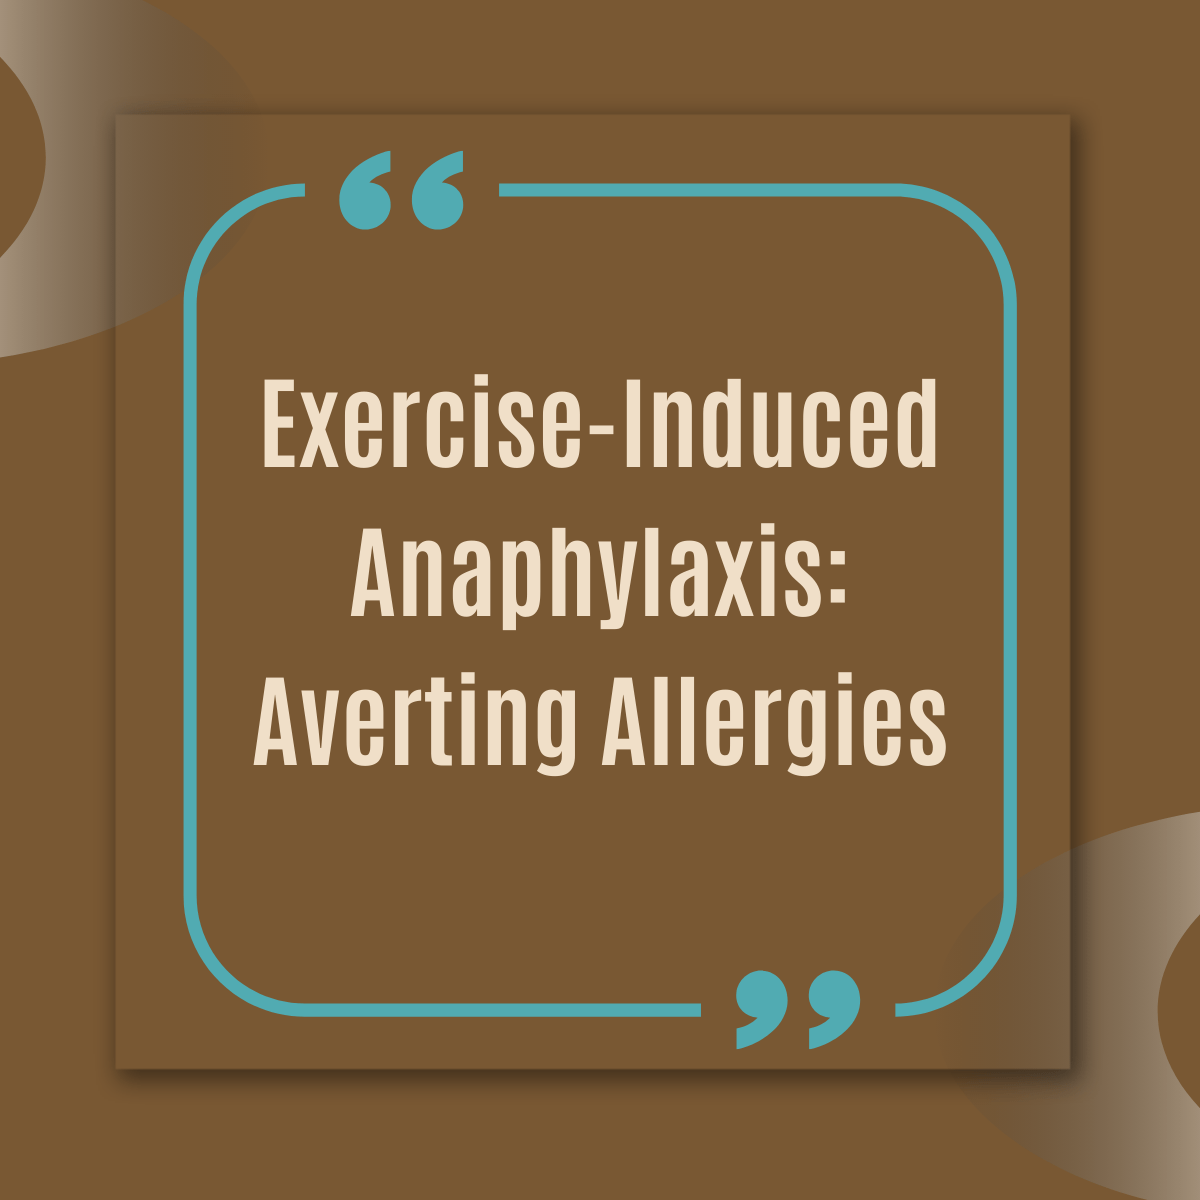 Exercise-Induced Anaphylaxis